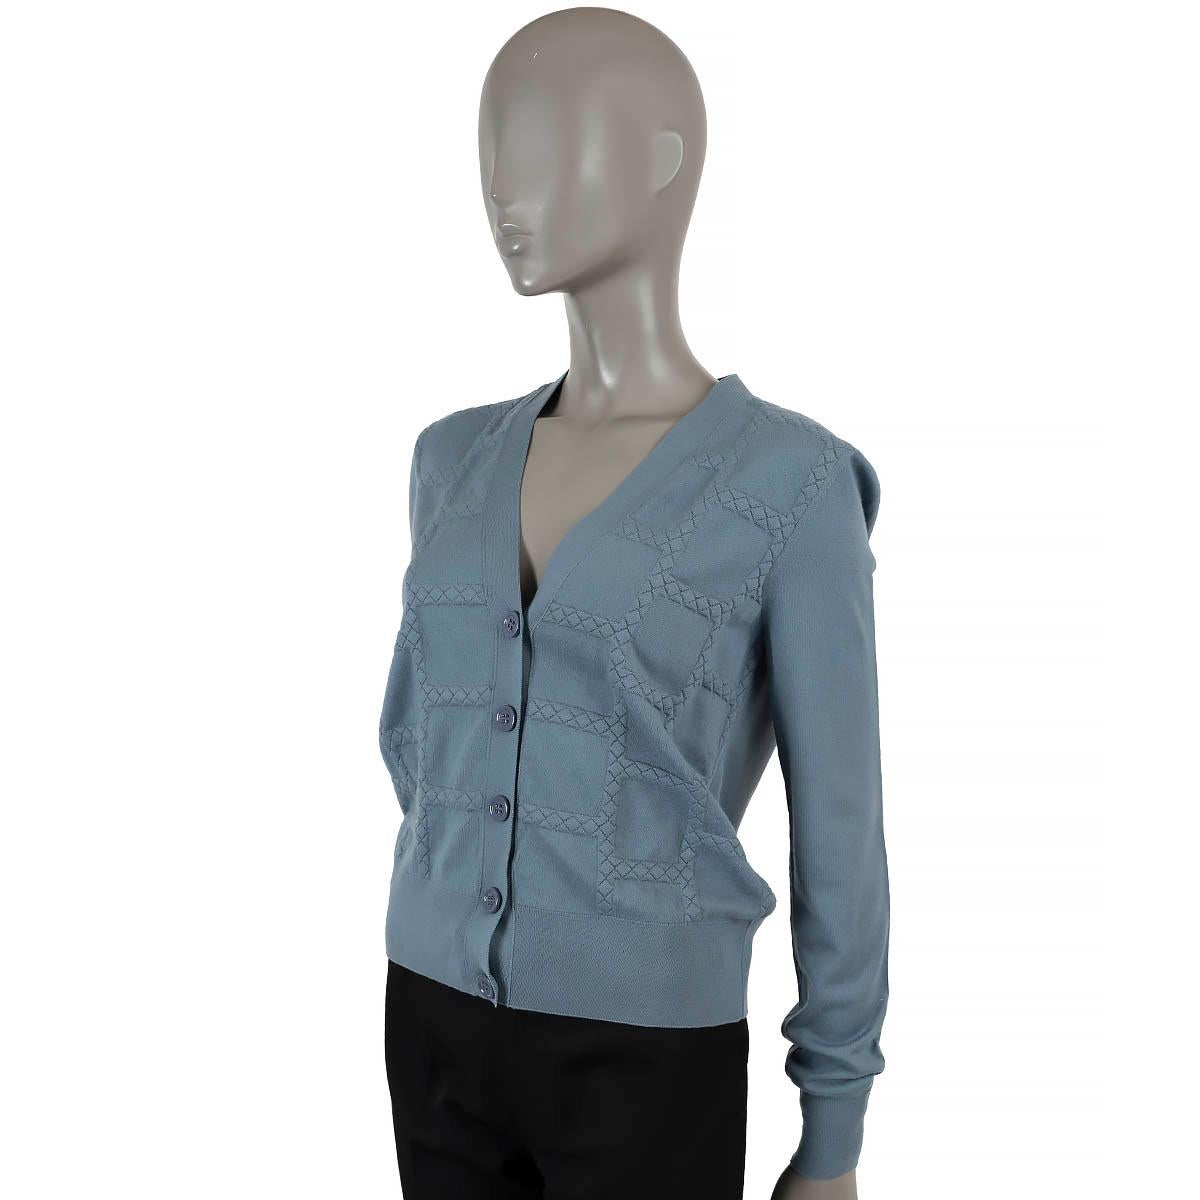 100% authentic Bottega Veneta 2018 cardigan in airforce blue wool (100%). Features a V-neck and Intrecciato textured details. Closes with buttons on the front. Has been worn and is in excellent condition.

Measurements
Model	517730 EPBV-18-101
Tag